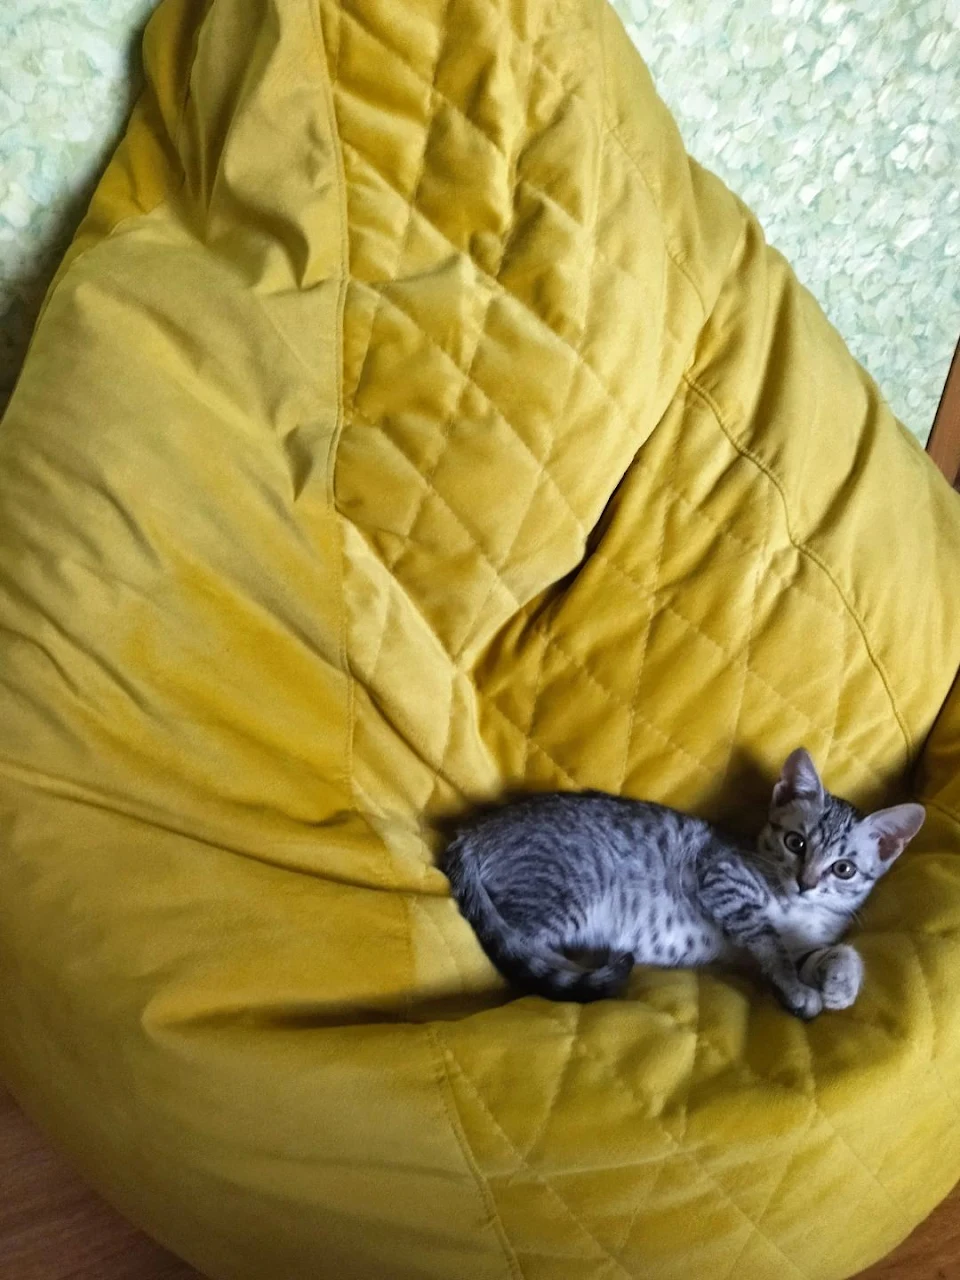 I bought this pouffe for me, but apparently my cat claimed it as its own.